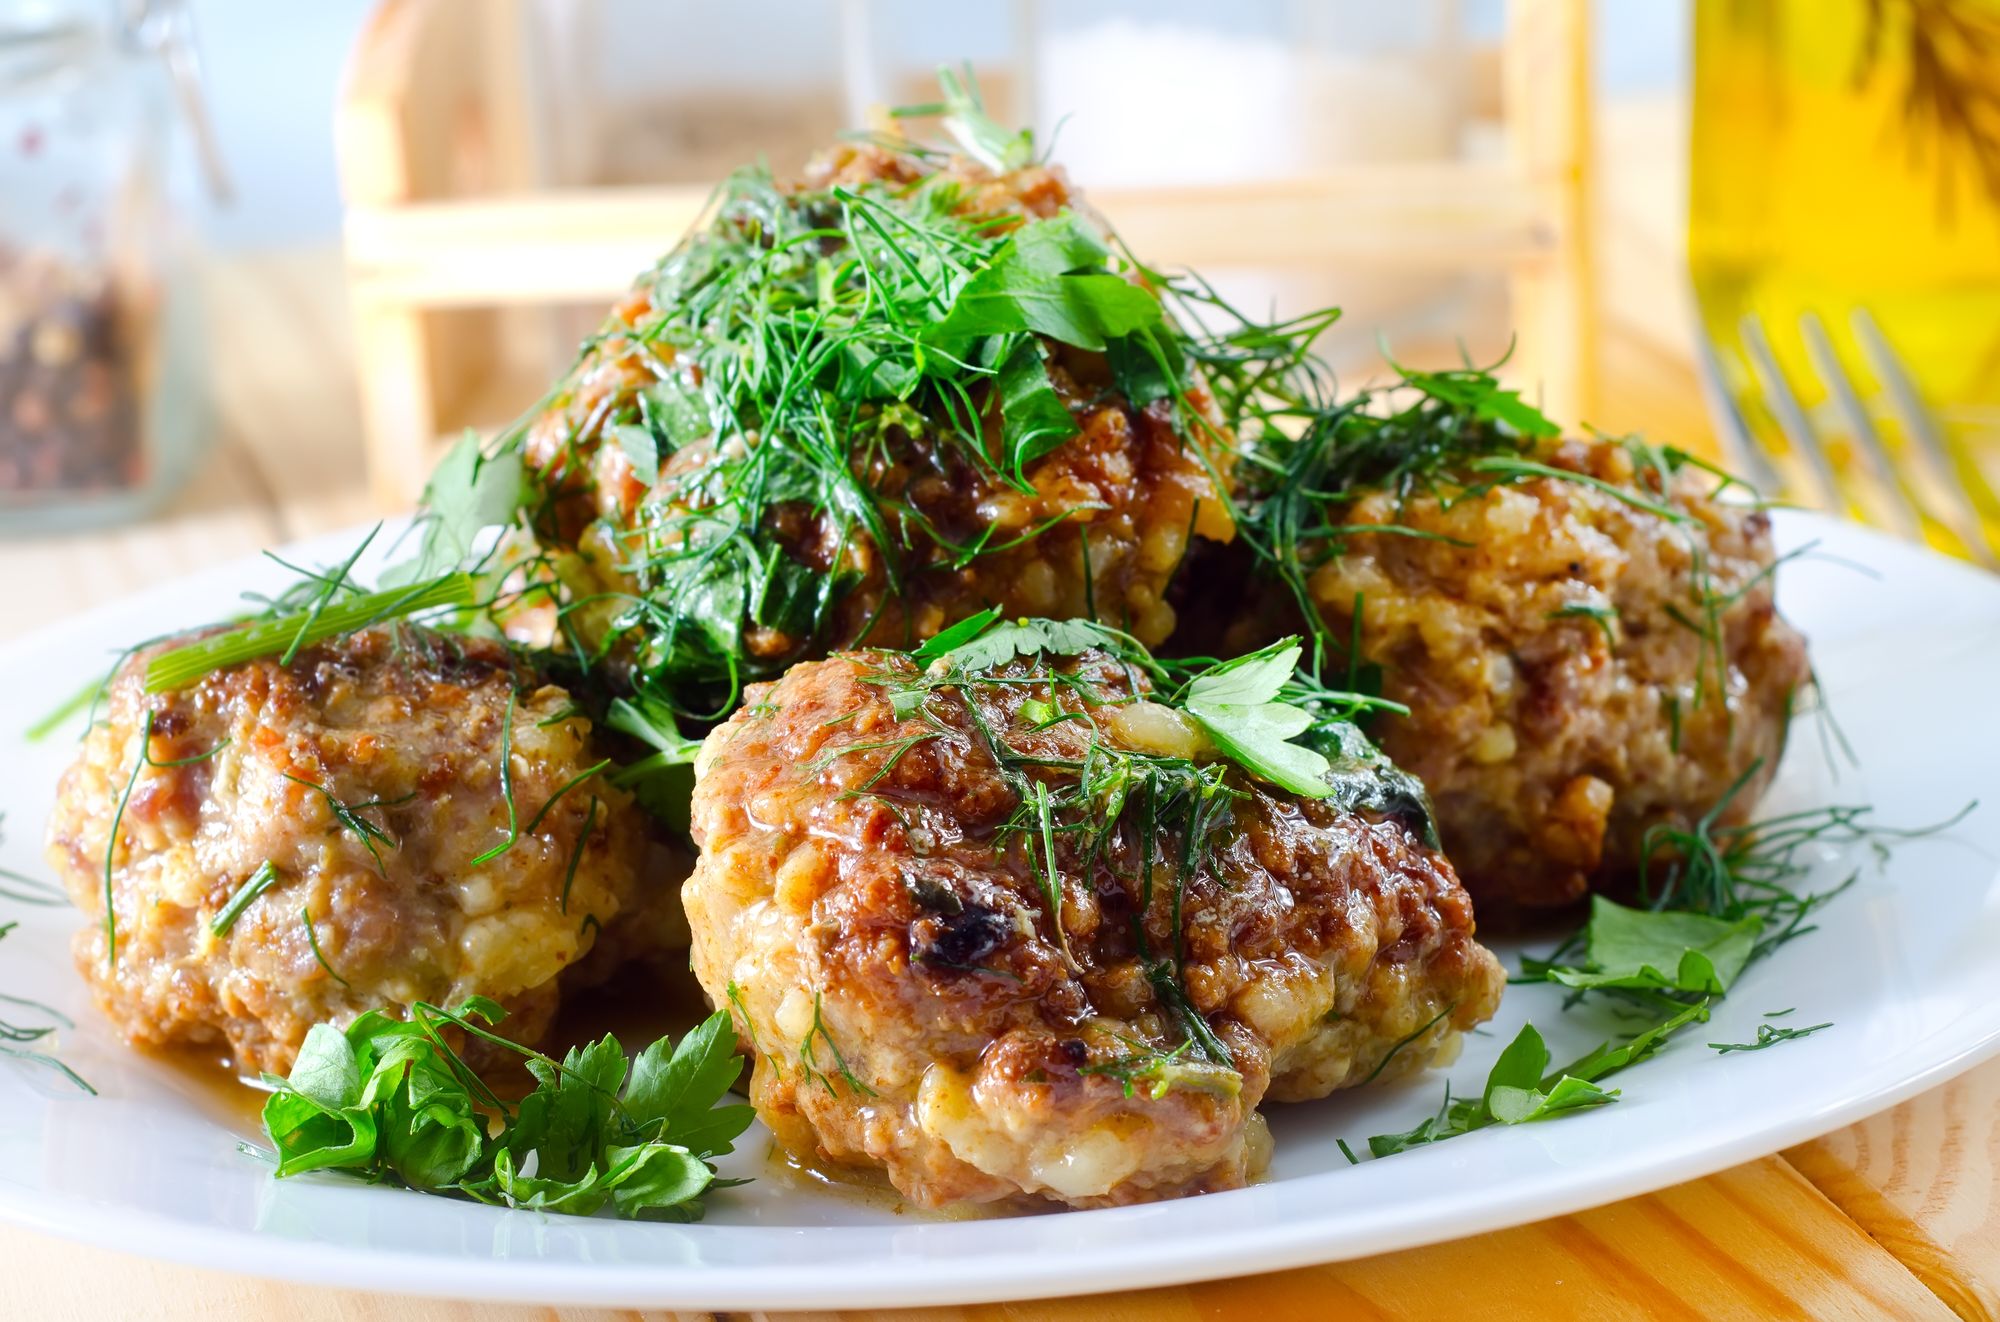 Pork and Anchovy Meatballs